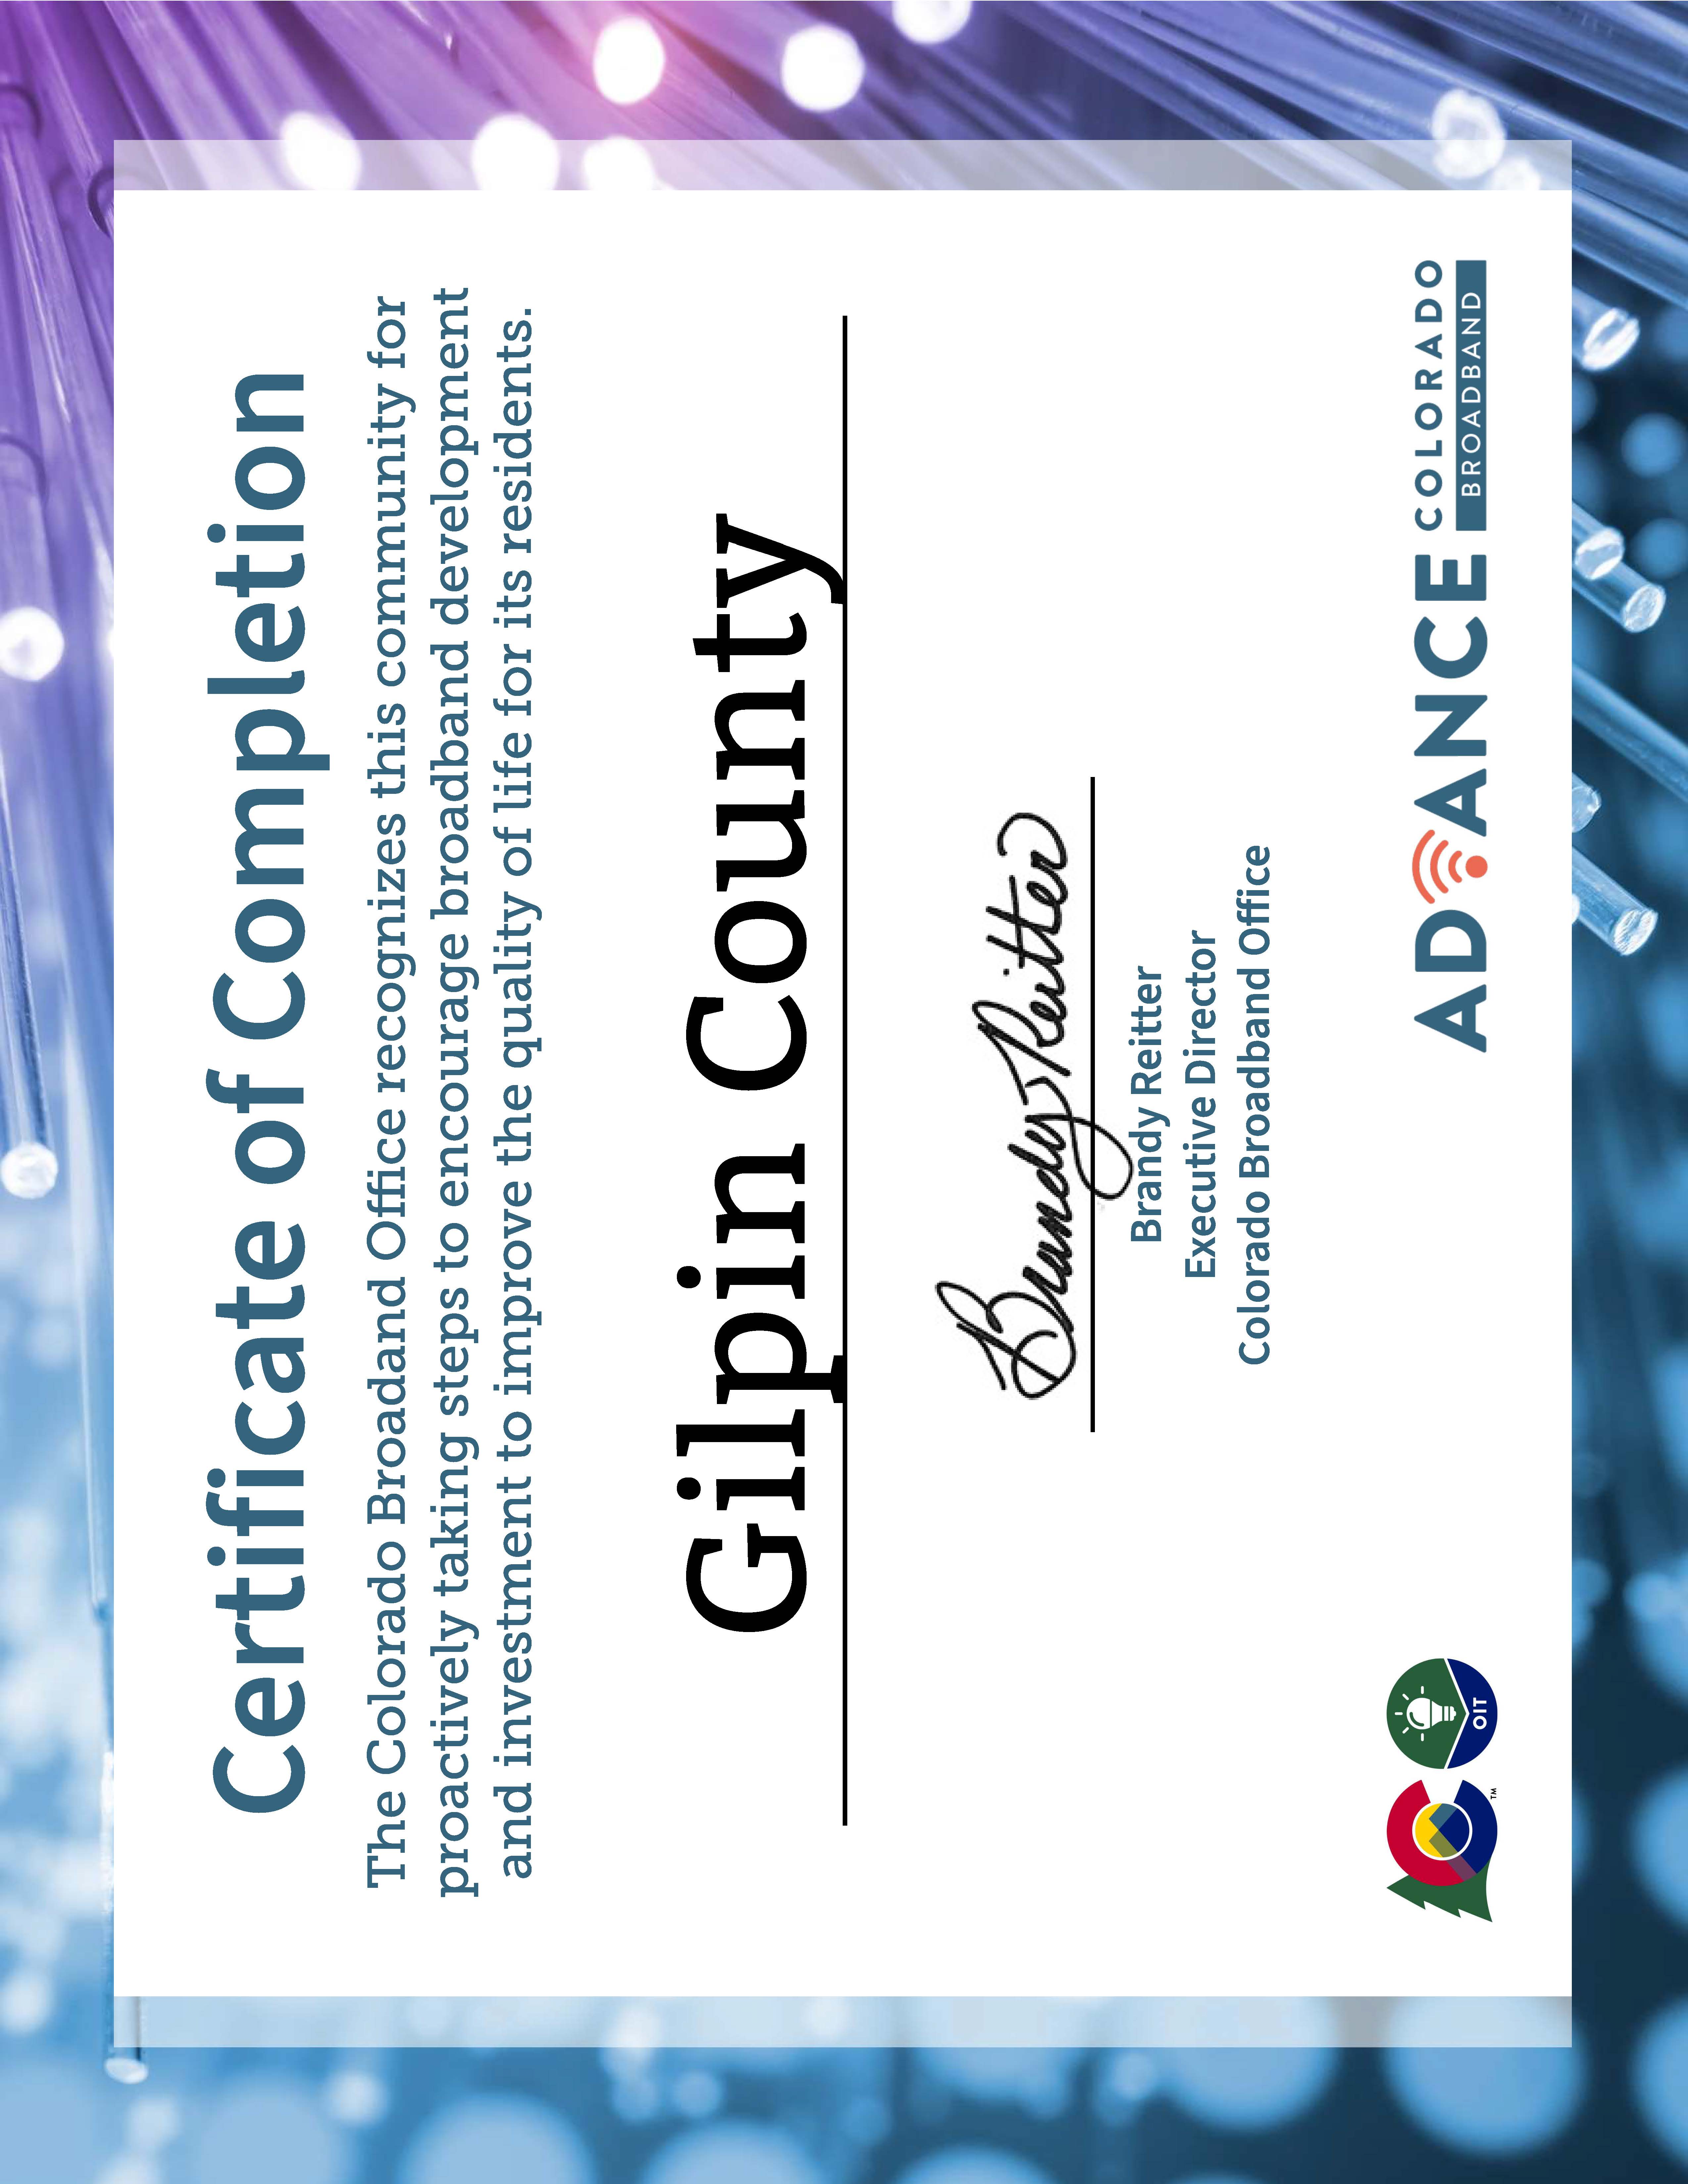 Certificate of Completion. The Colorado Broadband Office recognizes this community for proactively taking steps to encourage broadband development and investment to improve the quality of life for its residents. Awarded to: Gilpin County. Signed by Brandy Reitter, Executive Director, Colorado Broadband Office. Includes logos from State of Colorado, Colorado Broadband Office, and Advance Colorado Broadband.